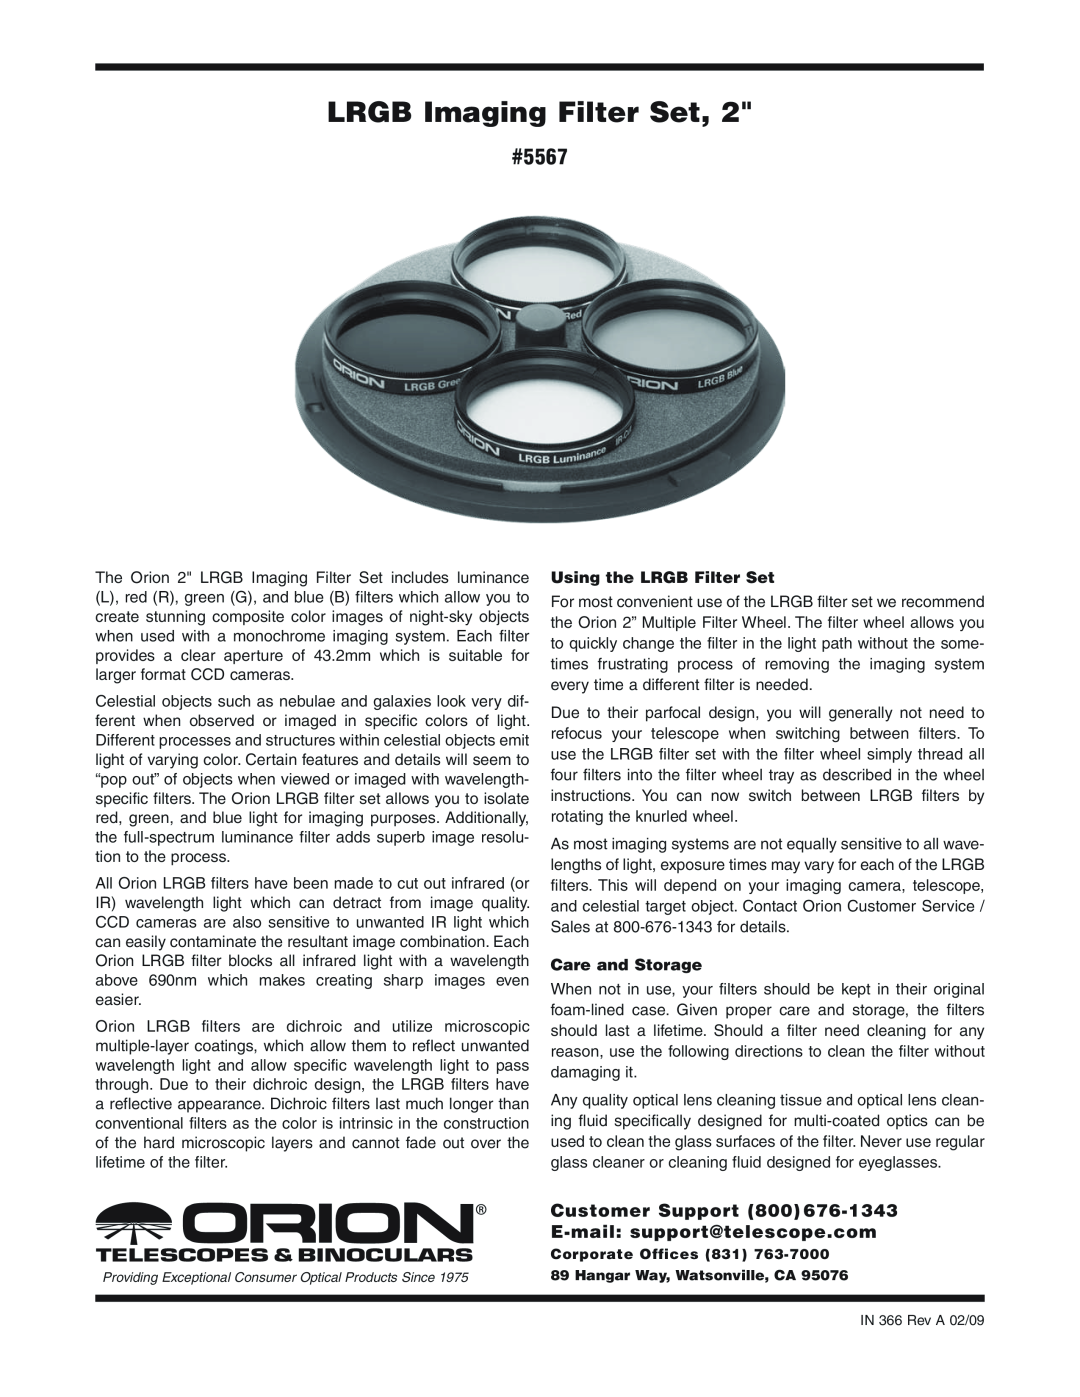 Orion manual LRGB Imaging Filter Set, #5567, Using the LRGB Filter Set, Care and Storage 